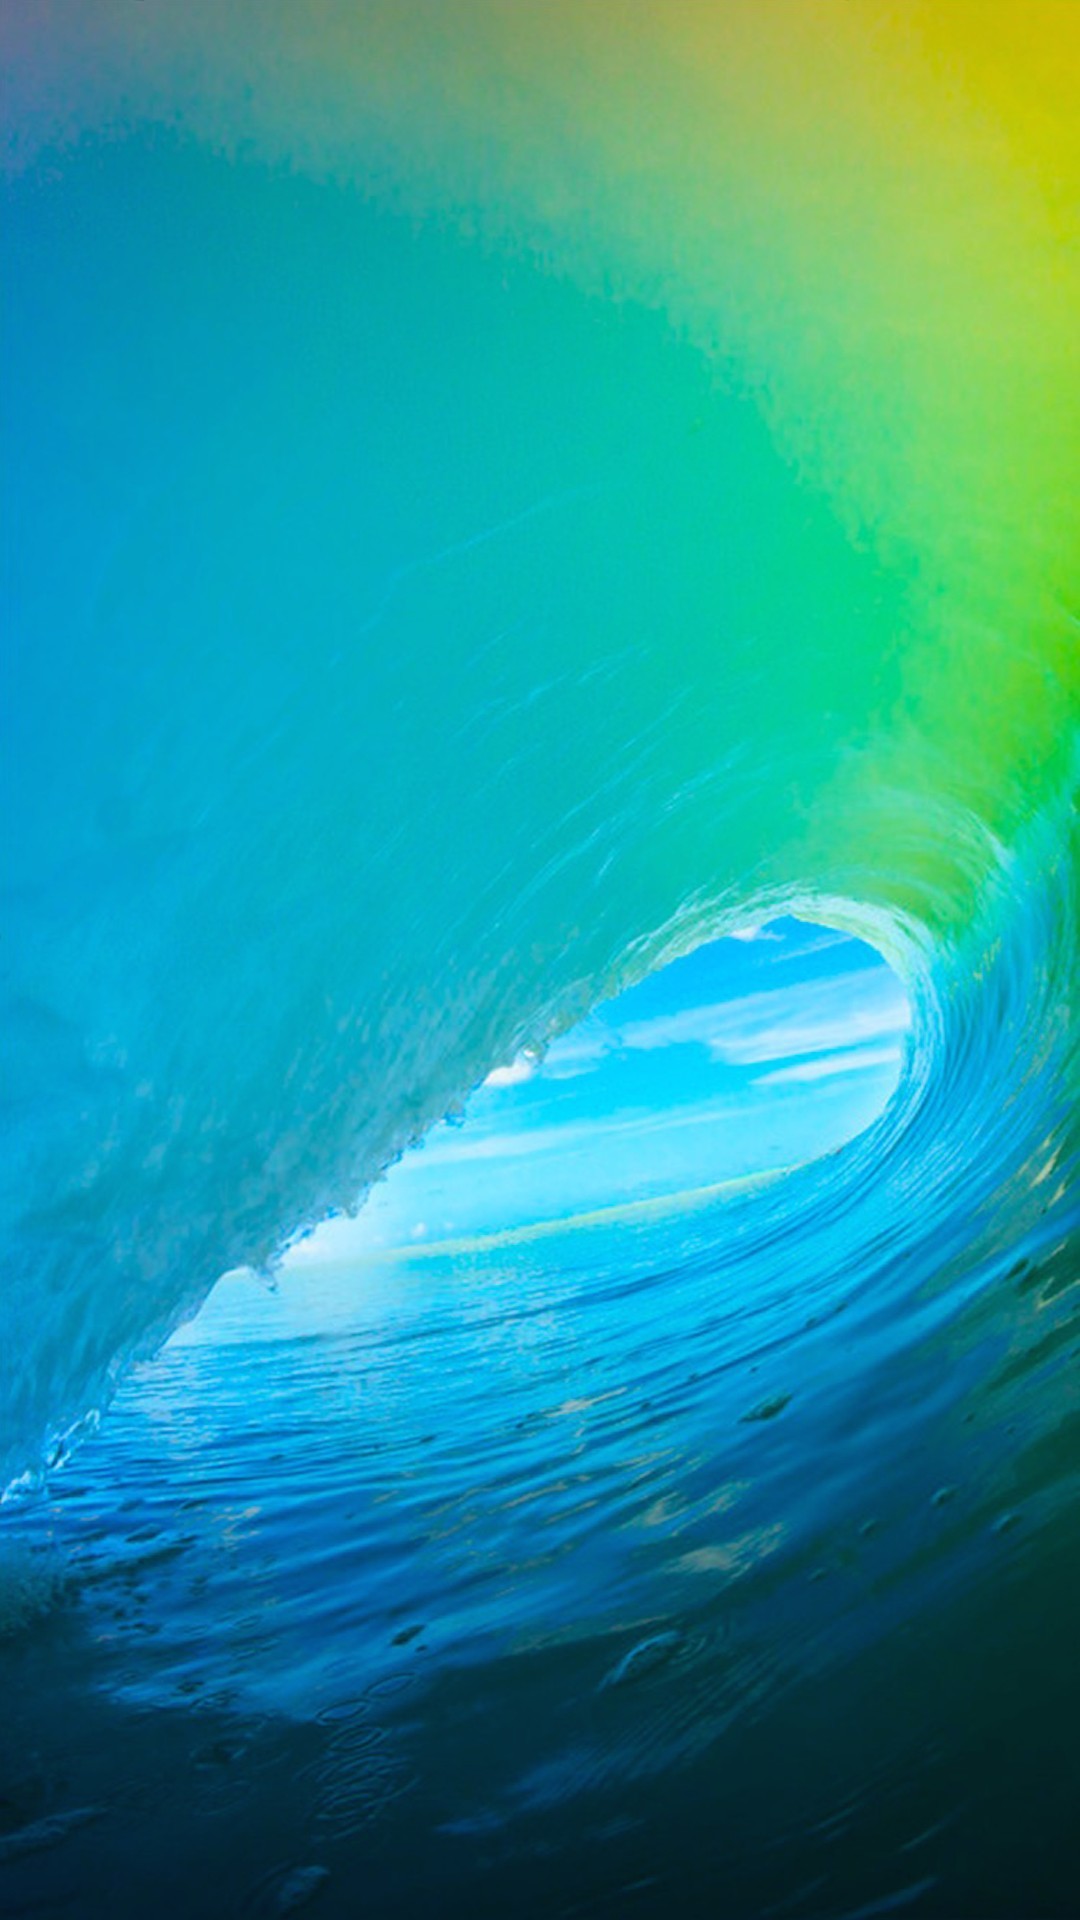 Explore Iphone 6 Wallpaper, Phone Wallpapers, and more!